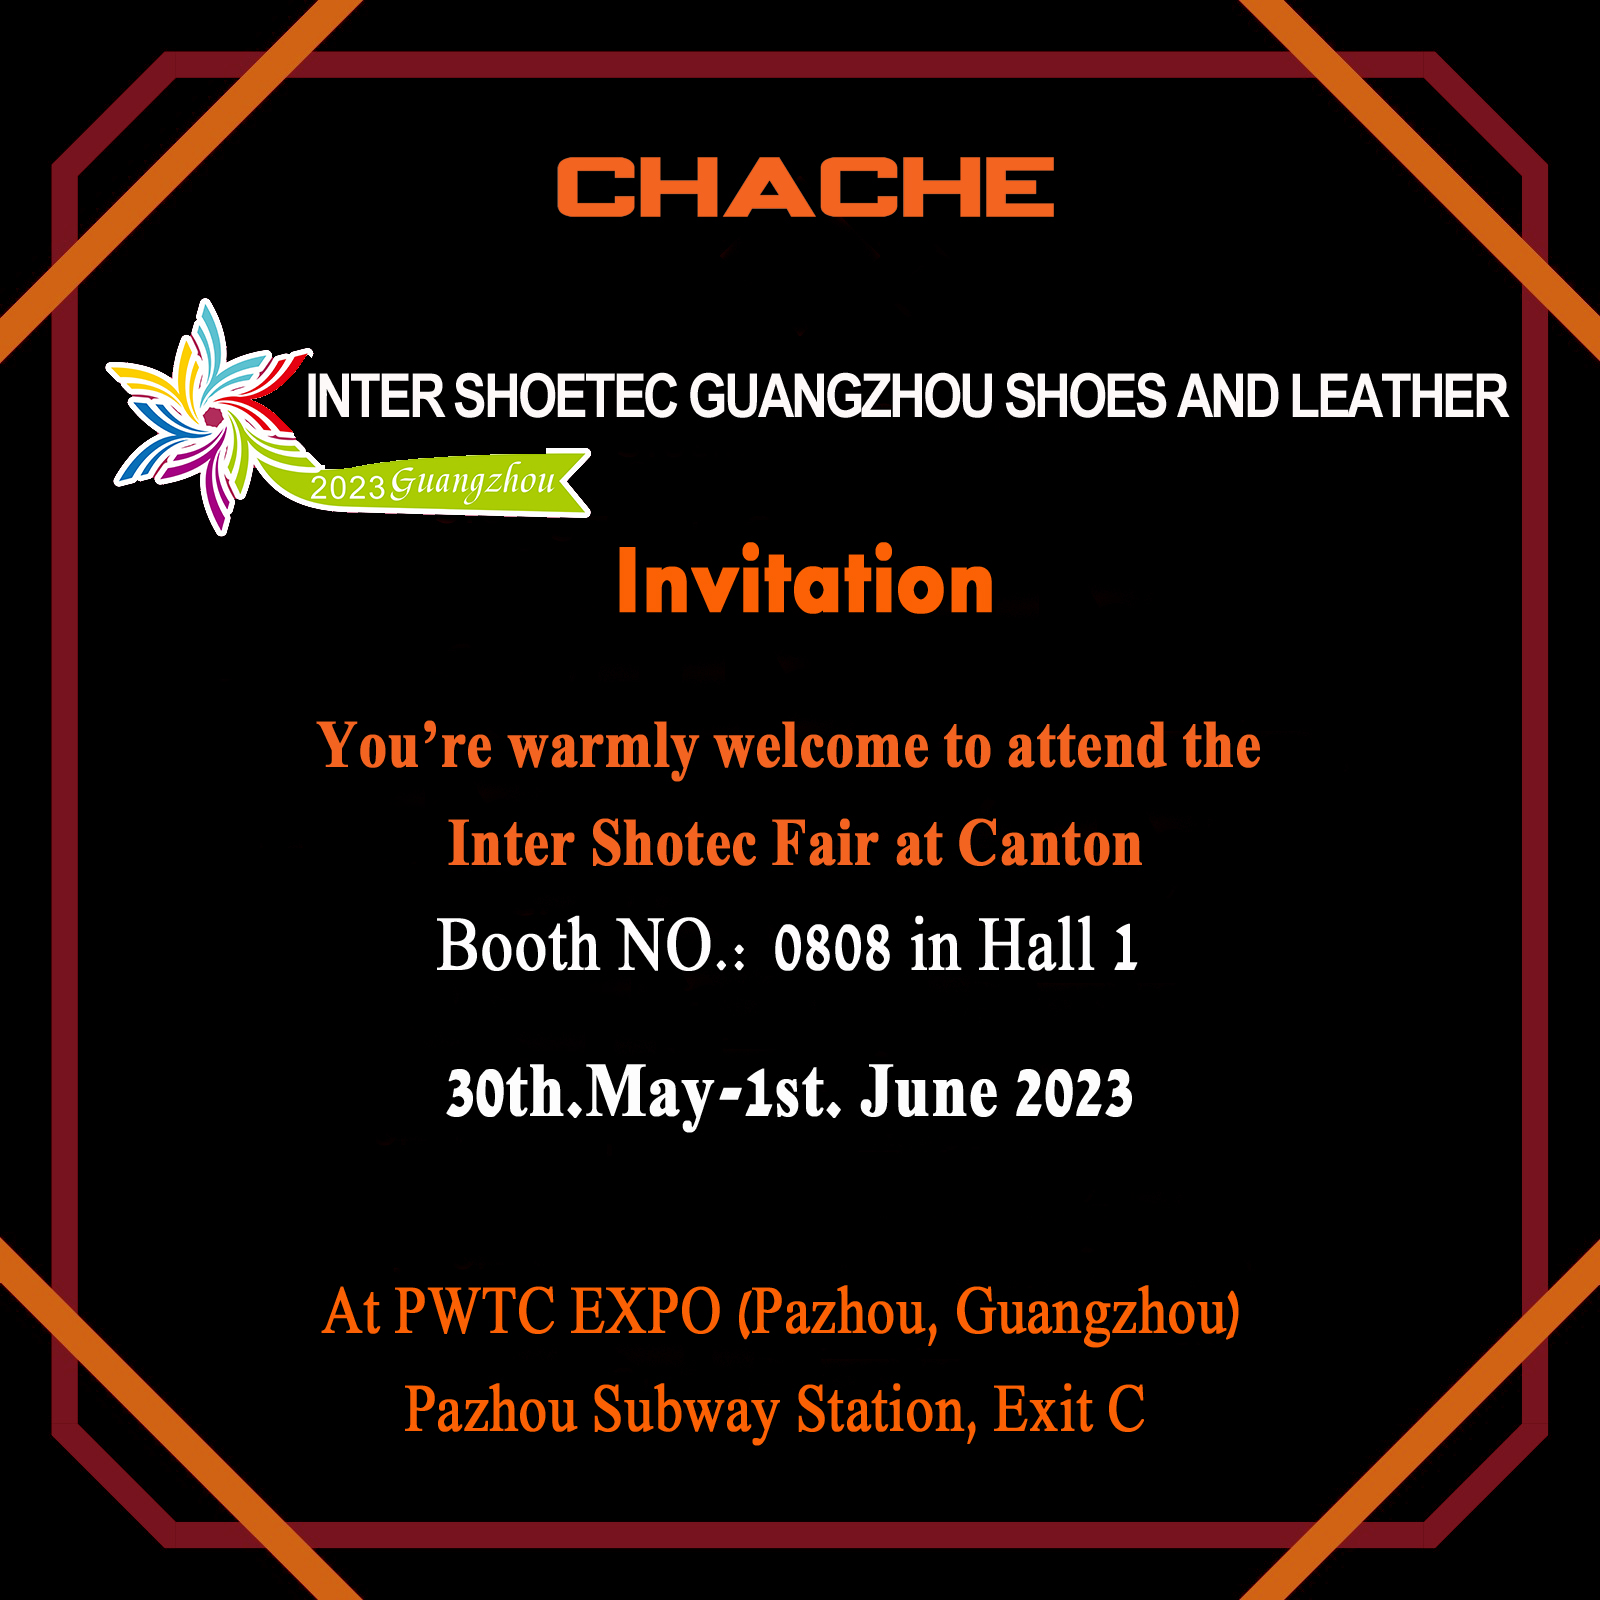 https://www.cn-chache.com/products/pattern-sewing-machine/3020-pattern-sewing-machine-2/